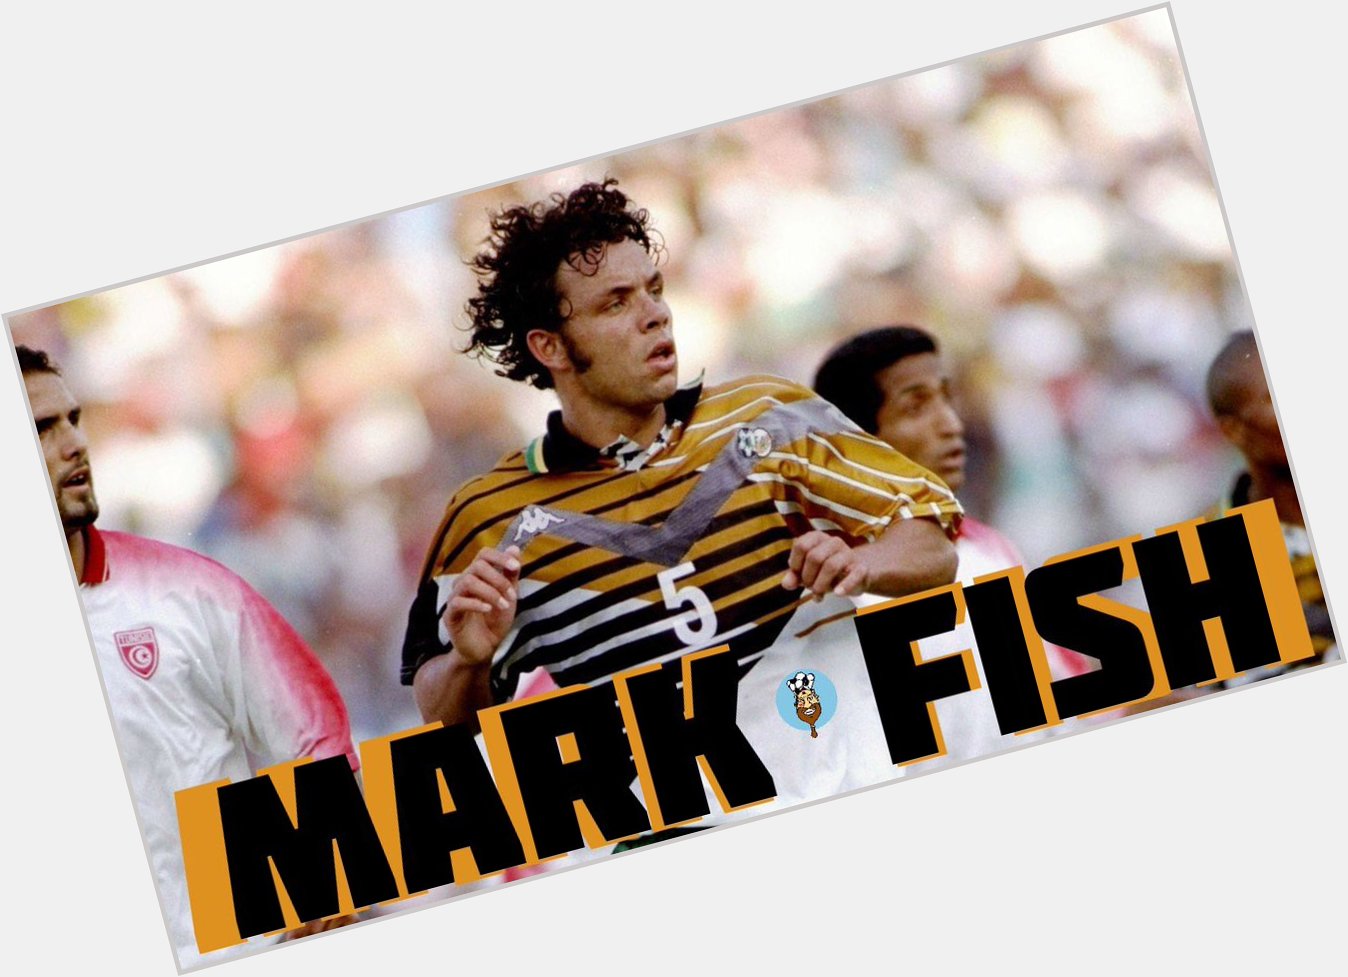 Happy 44th birthday to former South Africa  international & 96\ African champion, Mark Fish! What a legend  